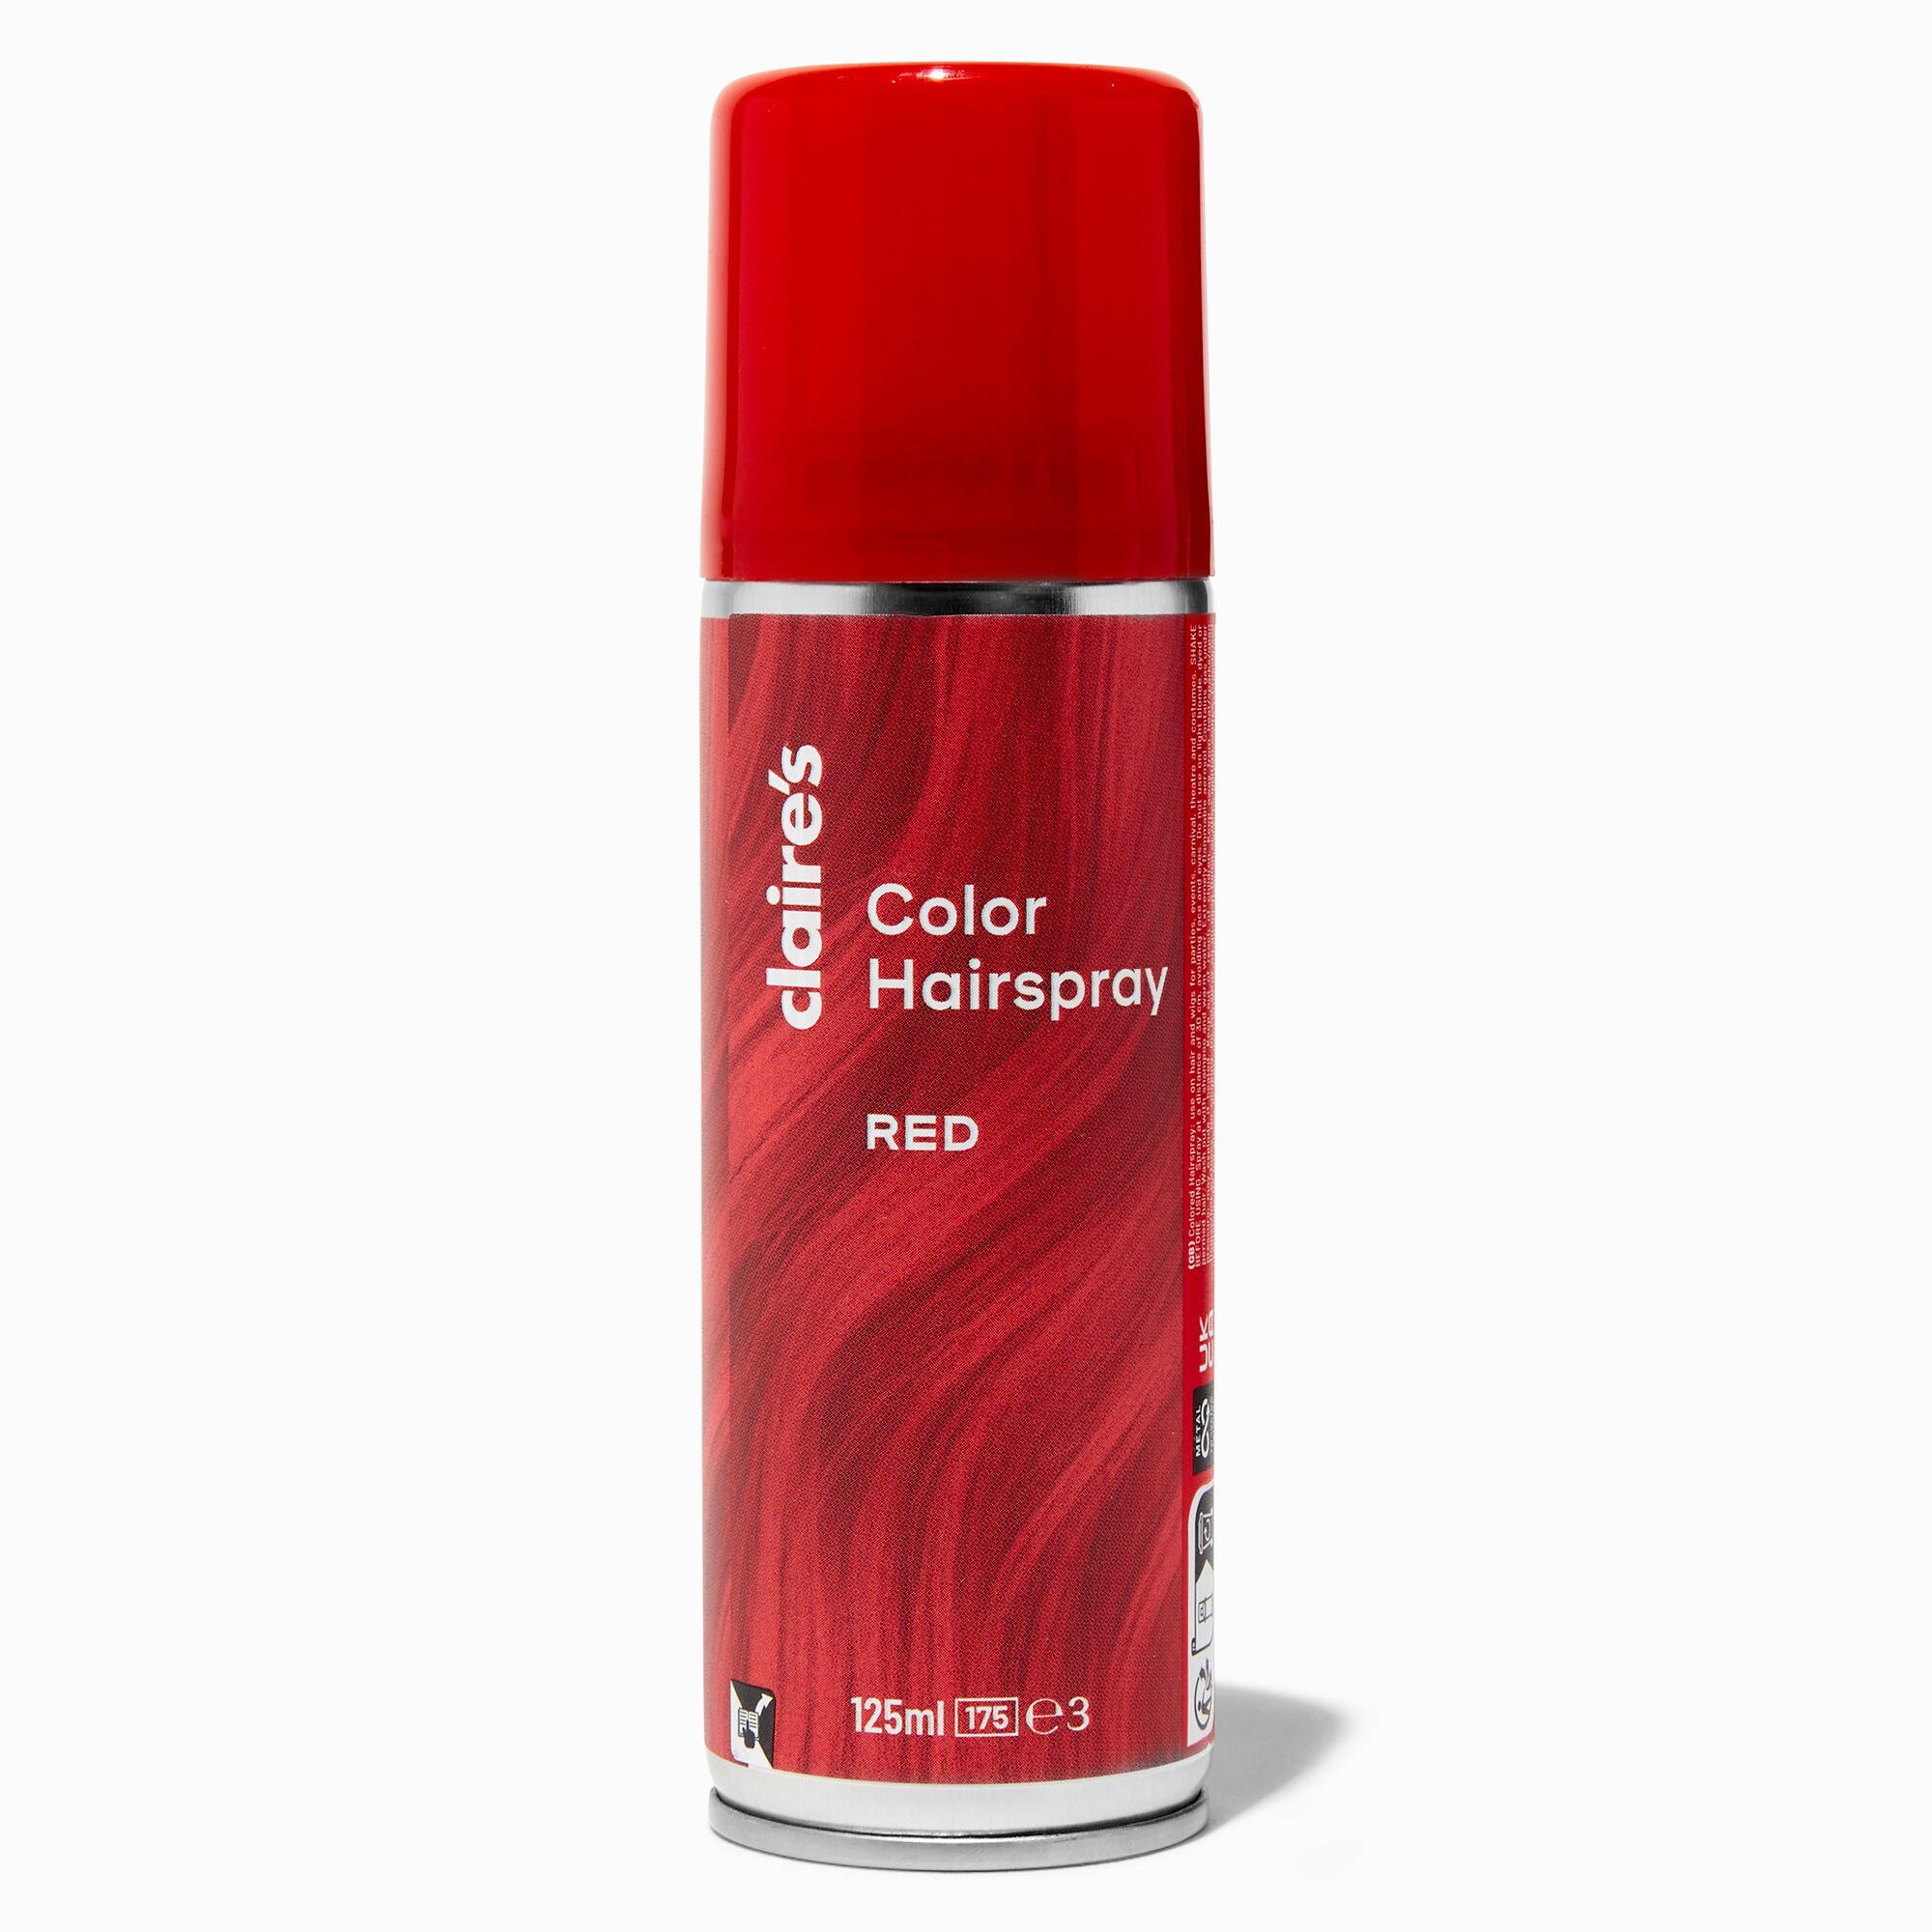 View Claires Colour Hairspray Red information